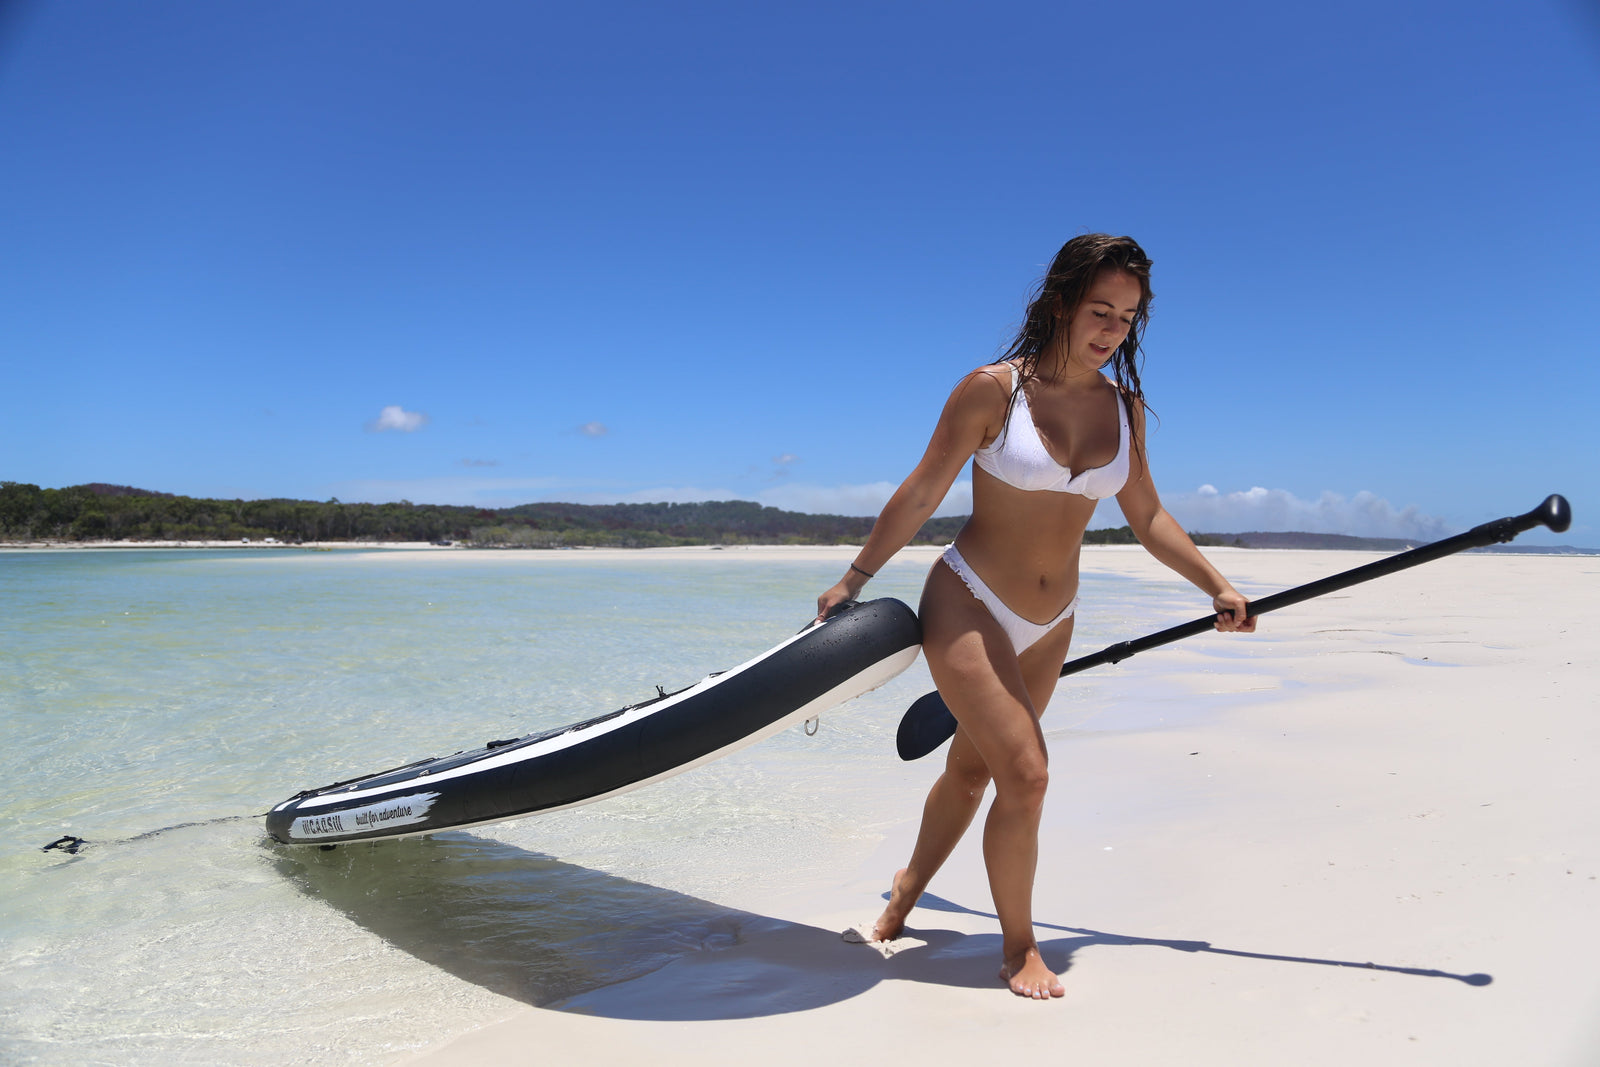 Stand Up Paddle Boarding: A Must-Do Activity This Summer